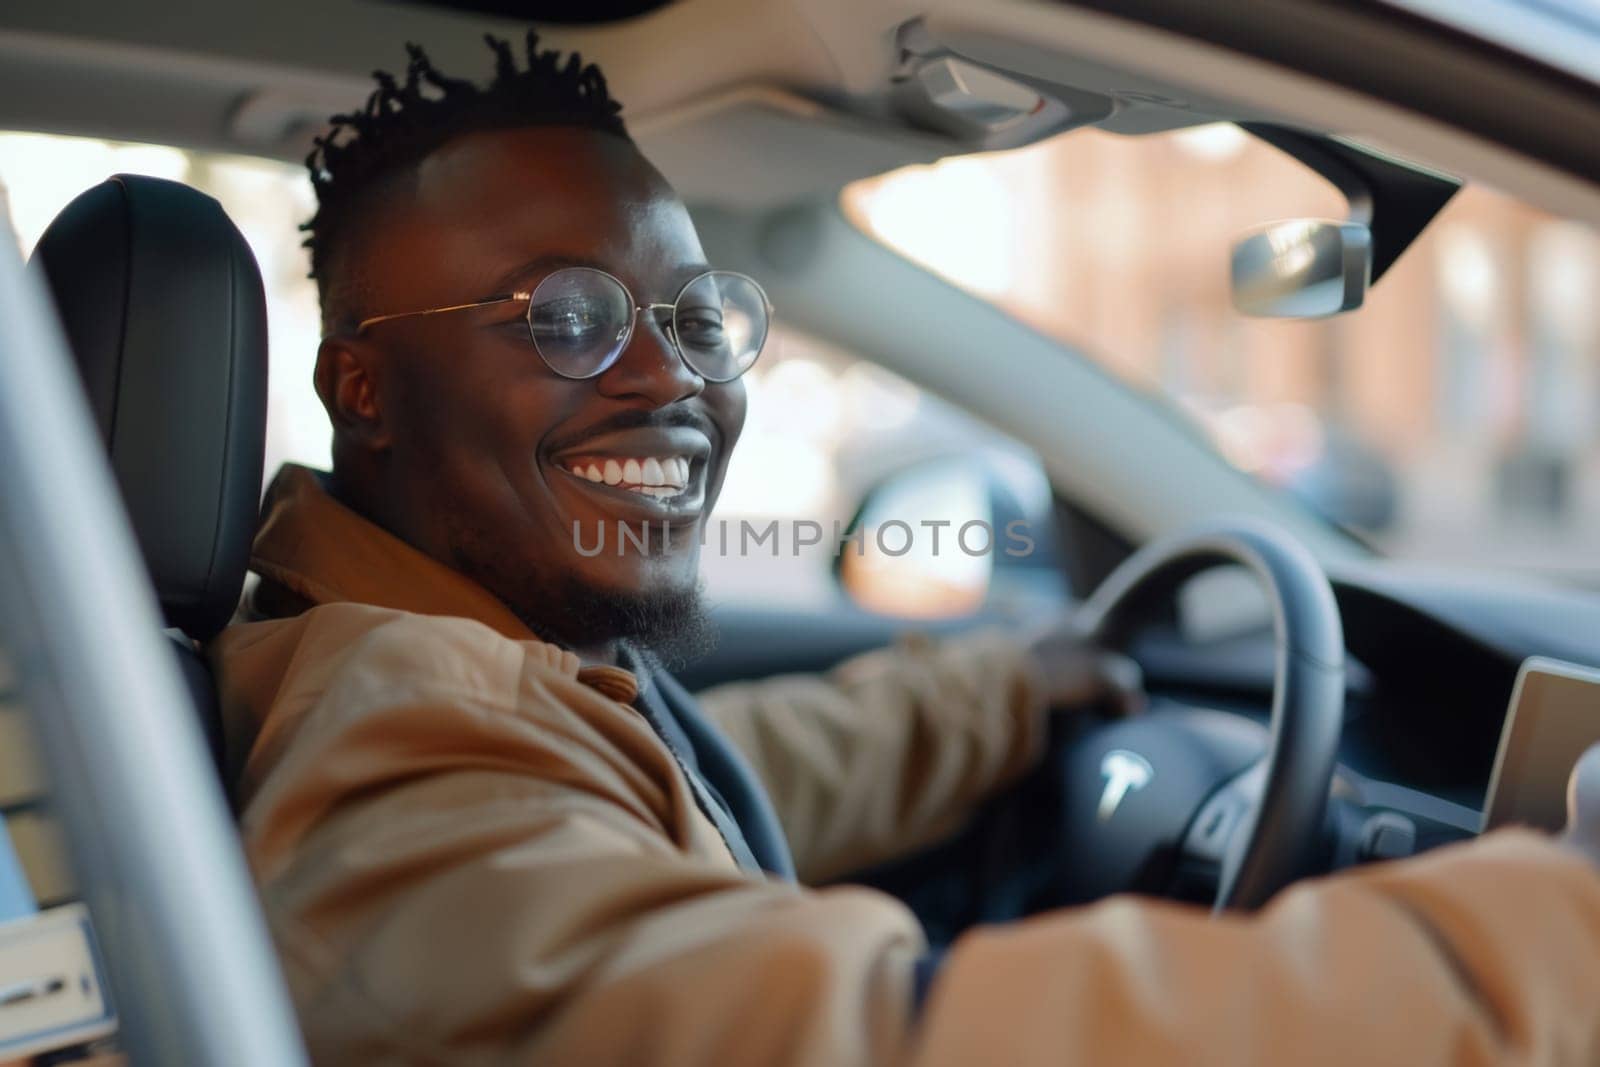 A cheerful African American man beams with satisfaction as he takes a new car for a test drive, enjoying the experience behind the wheel